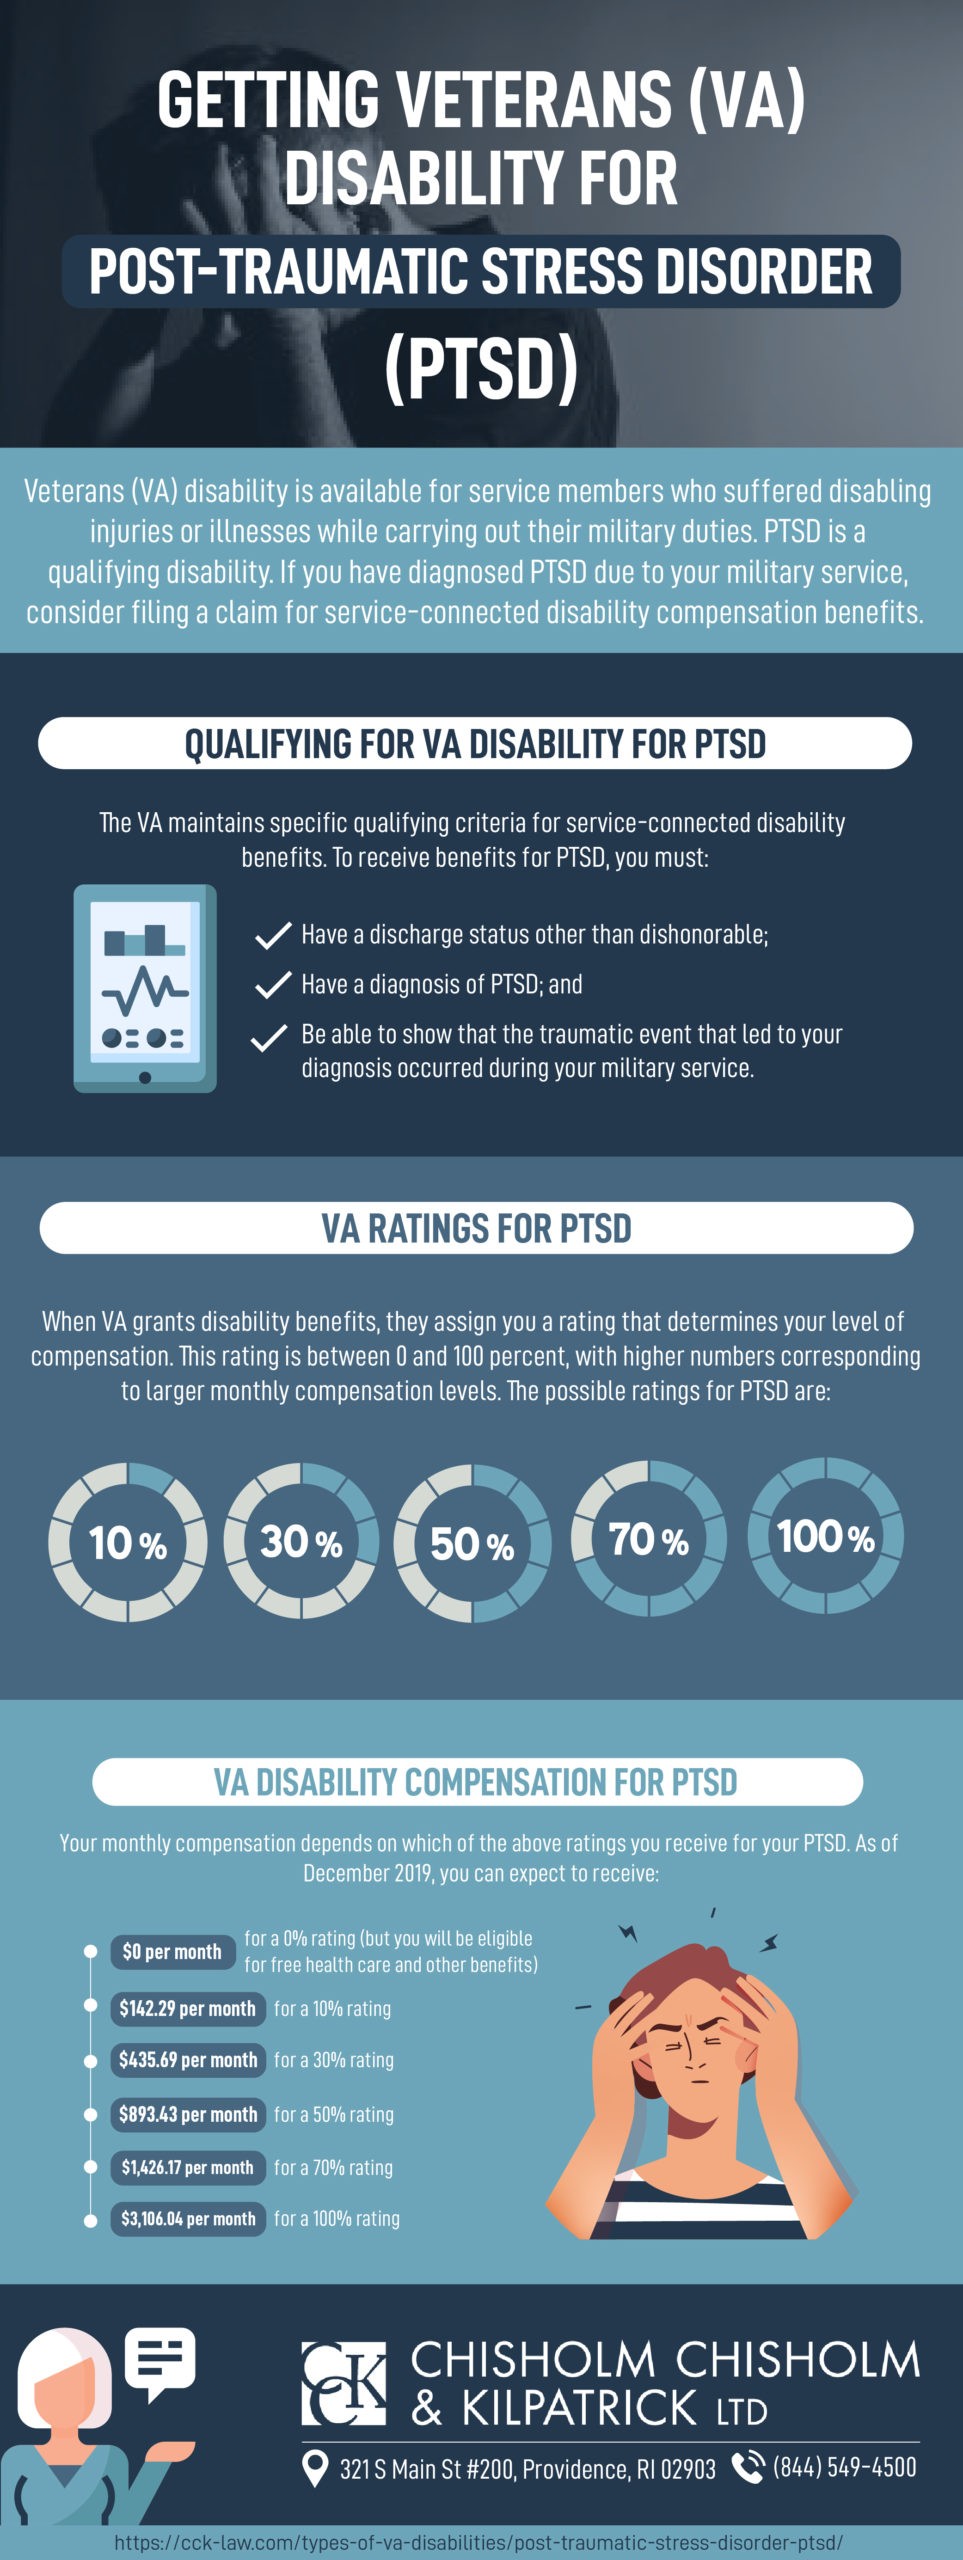 Rating ptsd and tbi disability VA trying